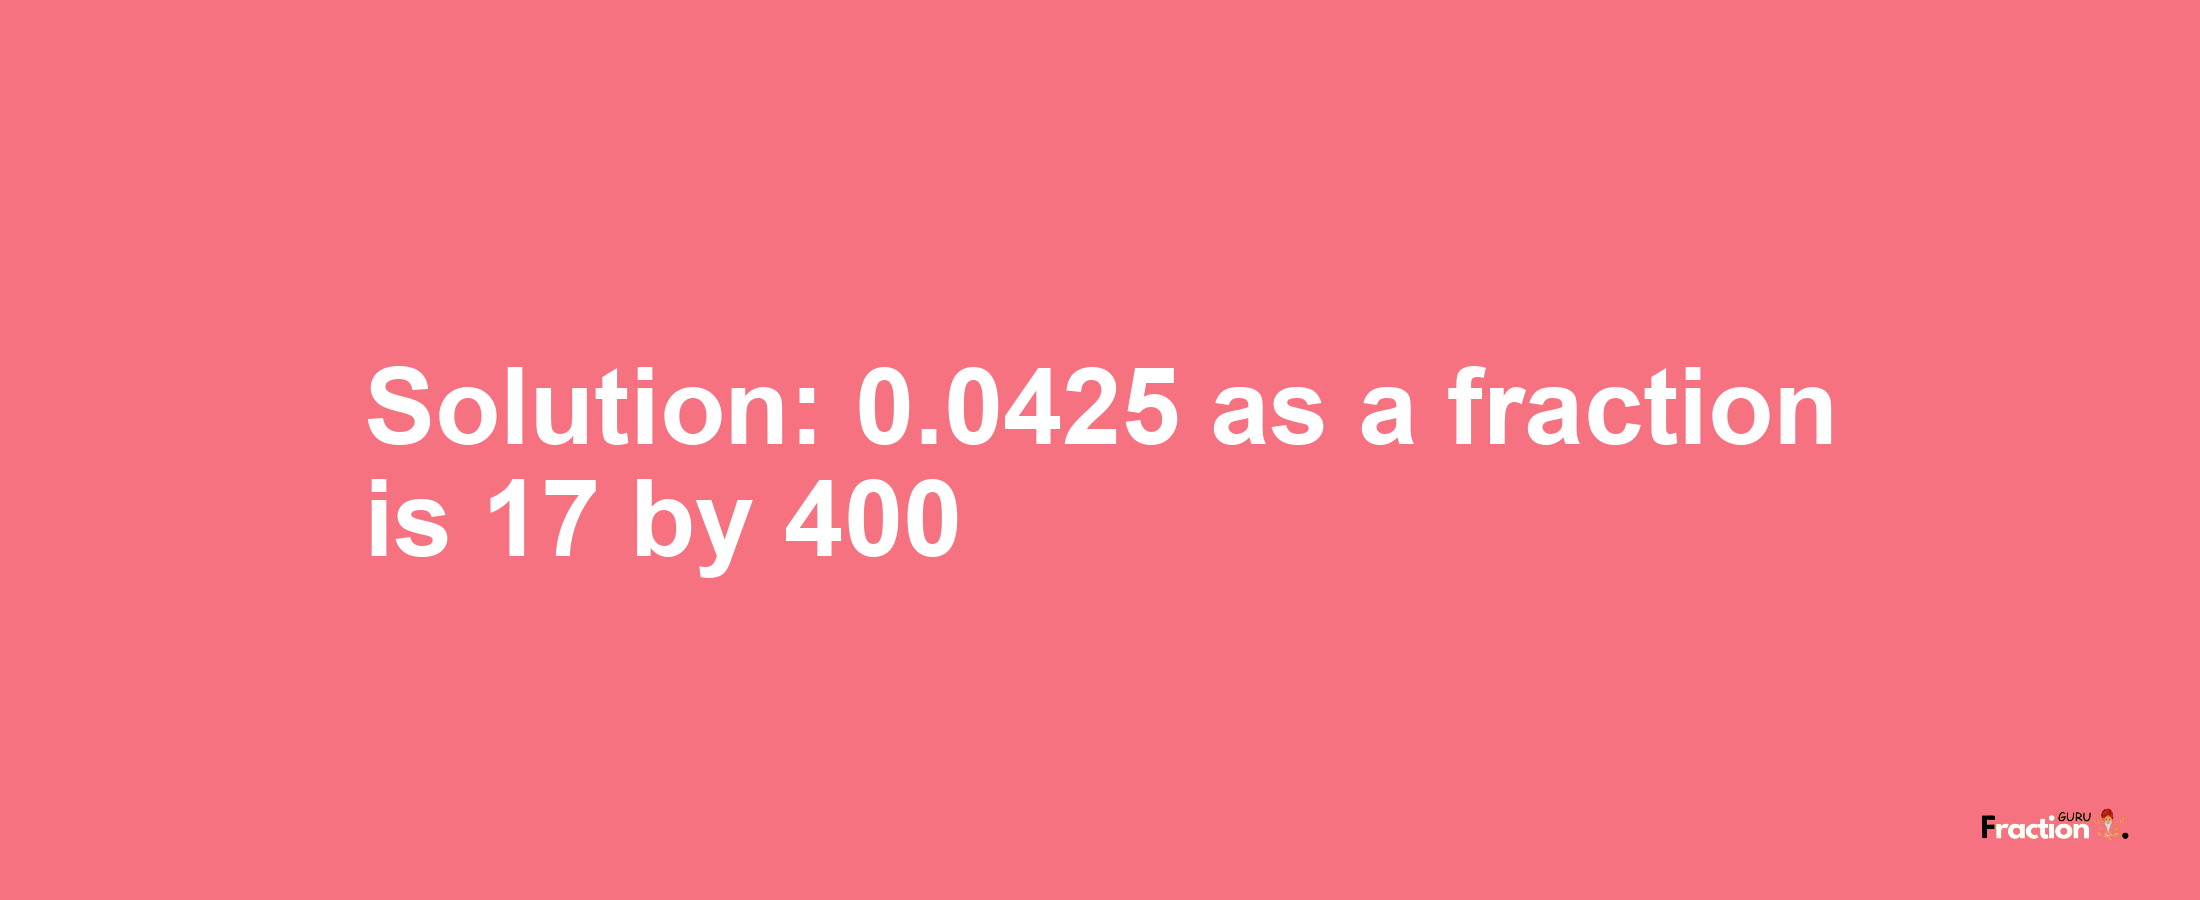 Solution:0.0425 as a fraction is 17/400